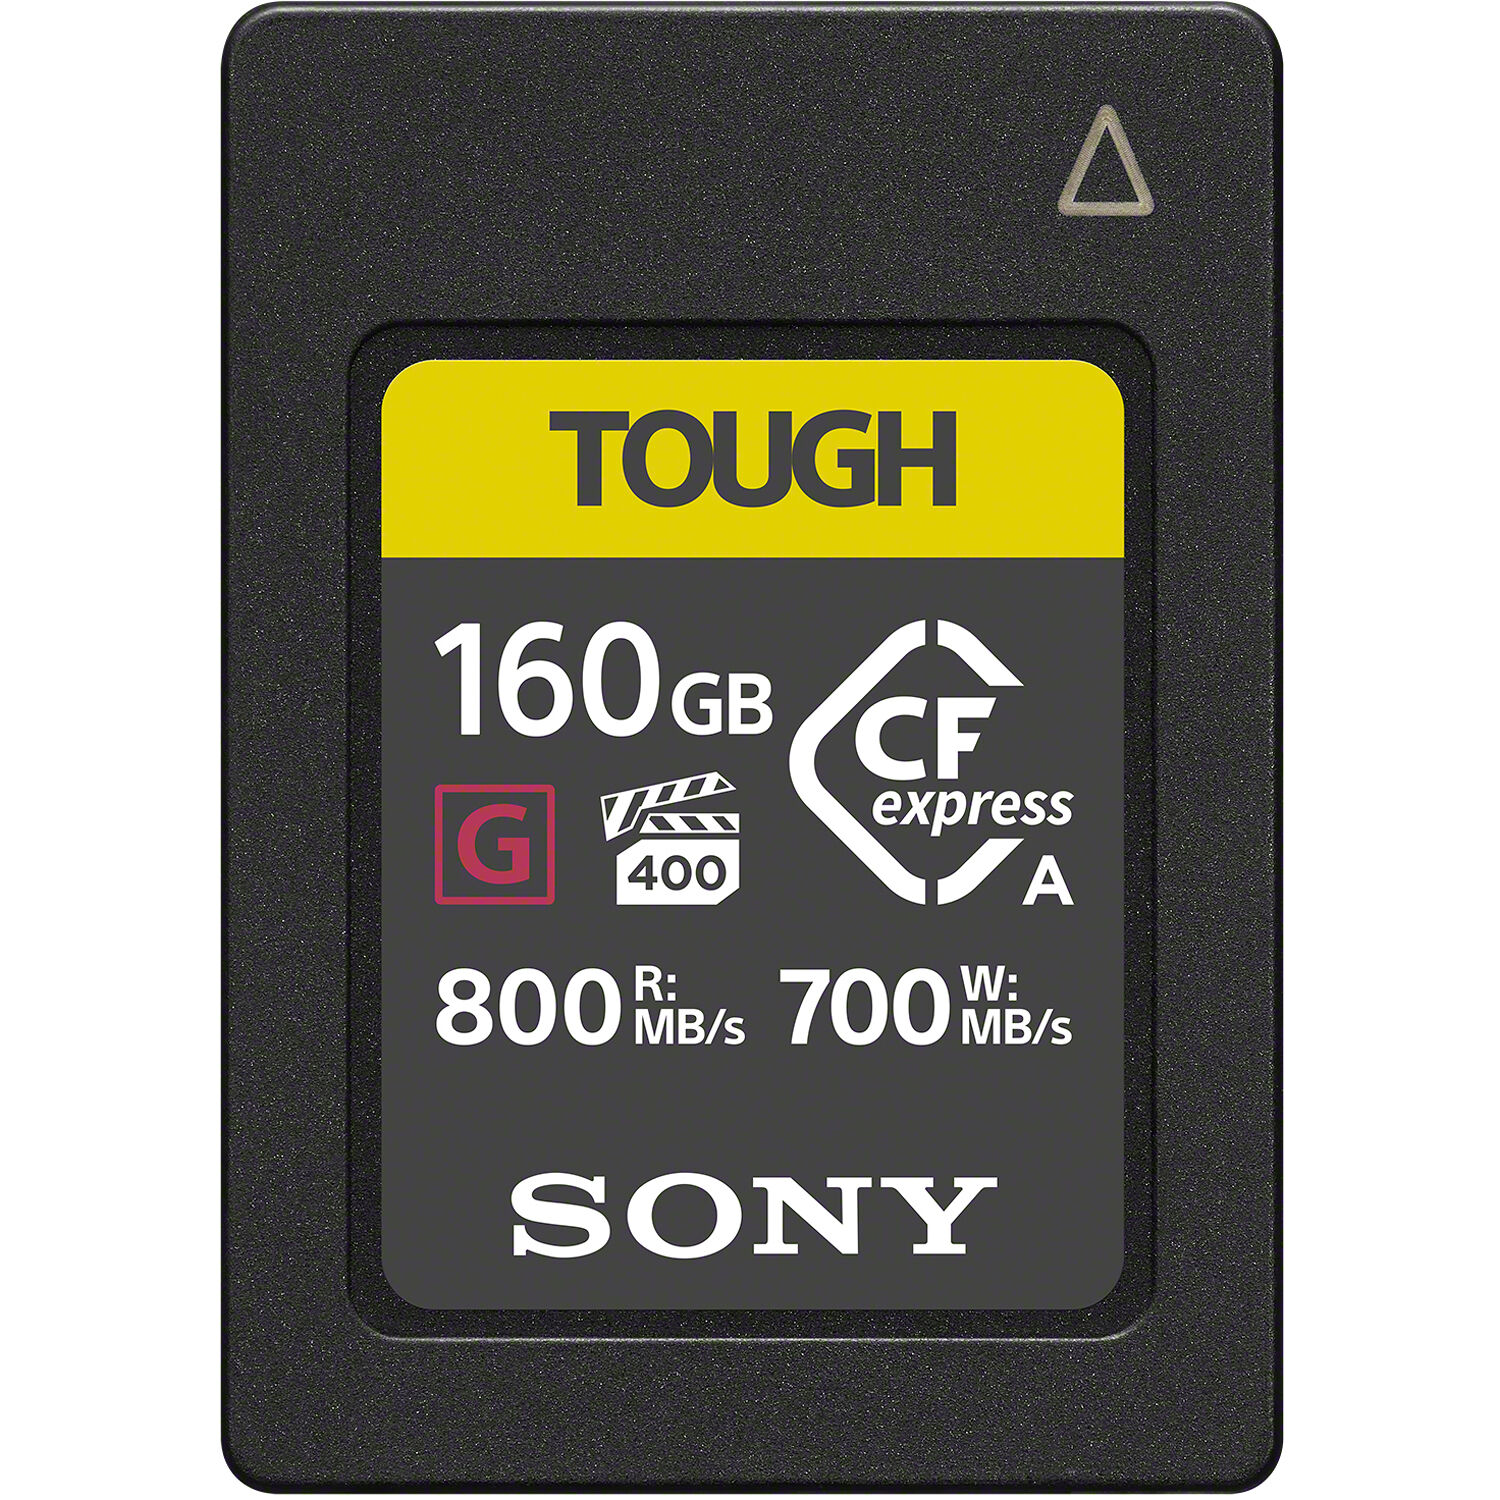 Sony 160GB CFexpress Type A TOUGH Memory Card CEAG160T B&H Photo